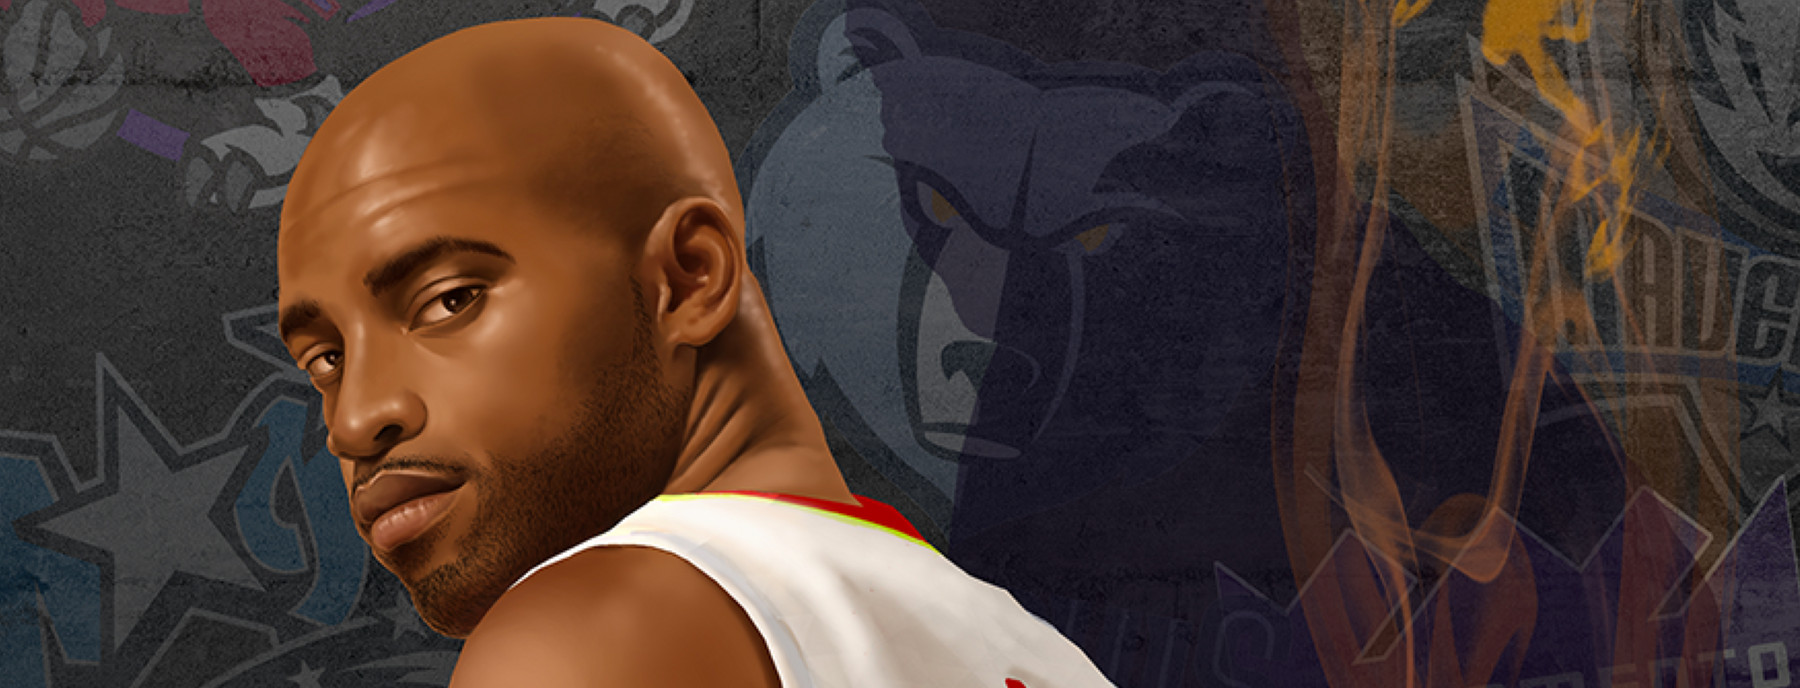 A detail view of Terry Smith's painting of Vince Carter's face.